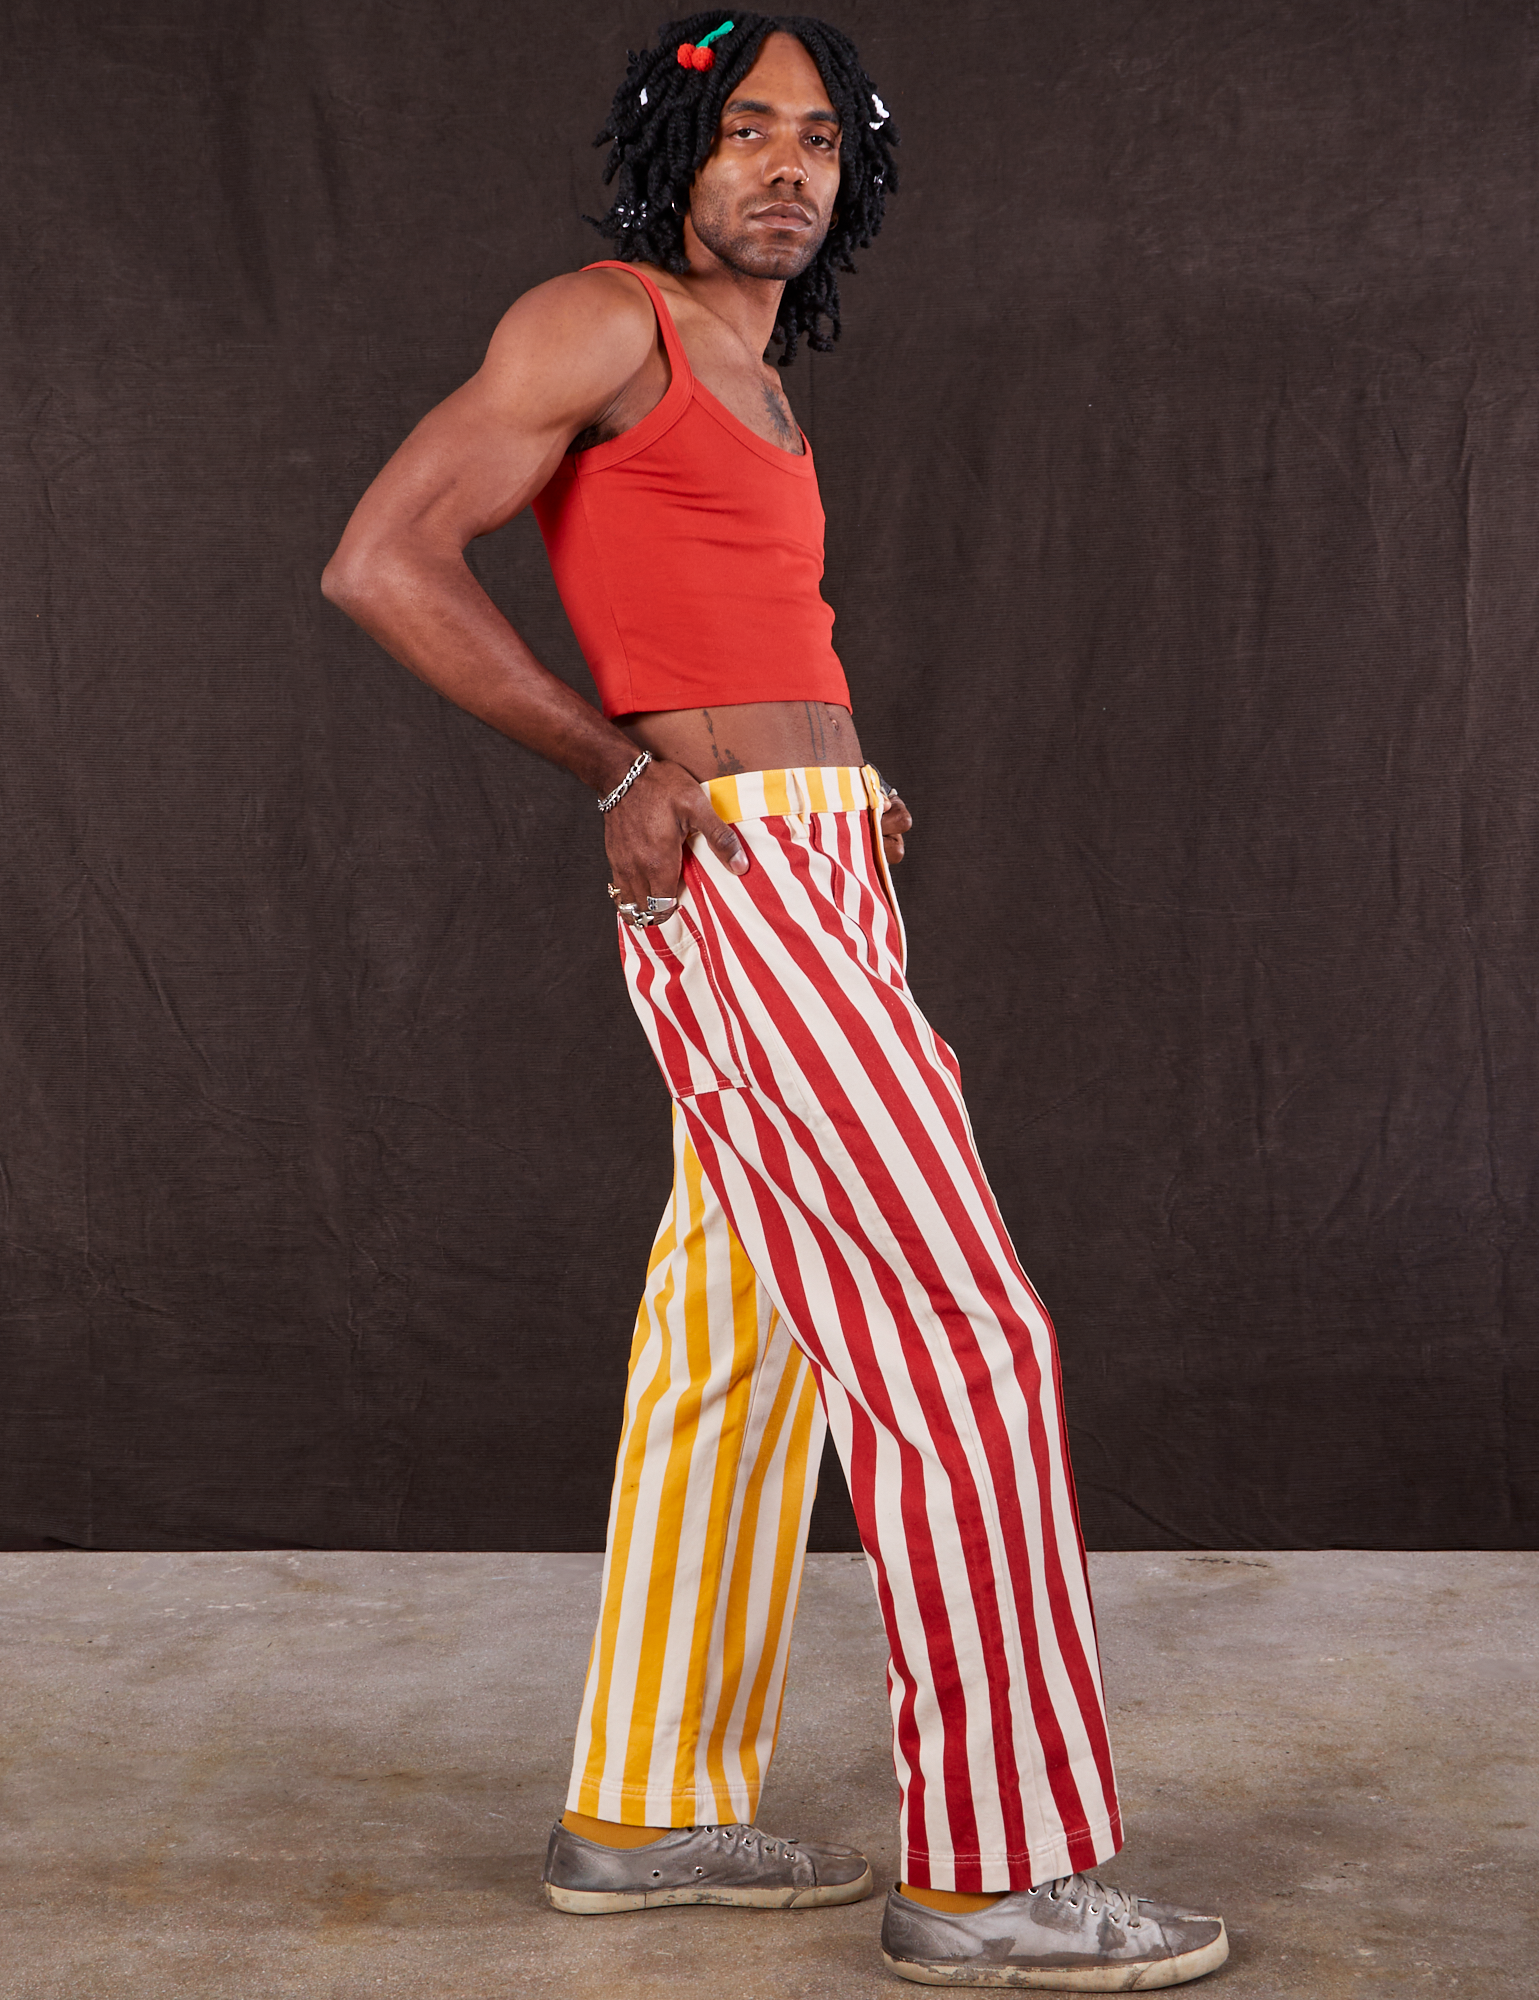 Side view of Western Pants in Ketchup/Mustard Stripes and mustang red Cami on Jerrod